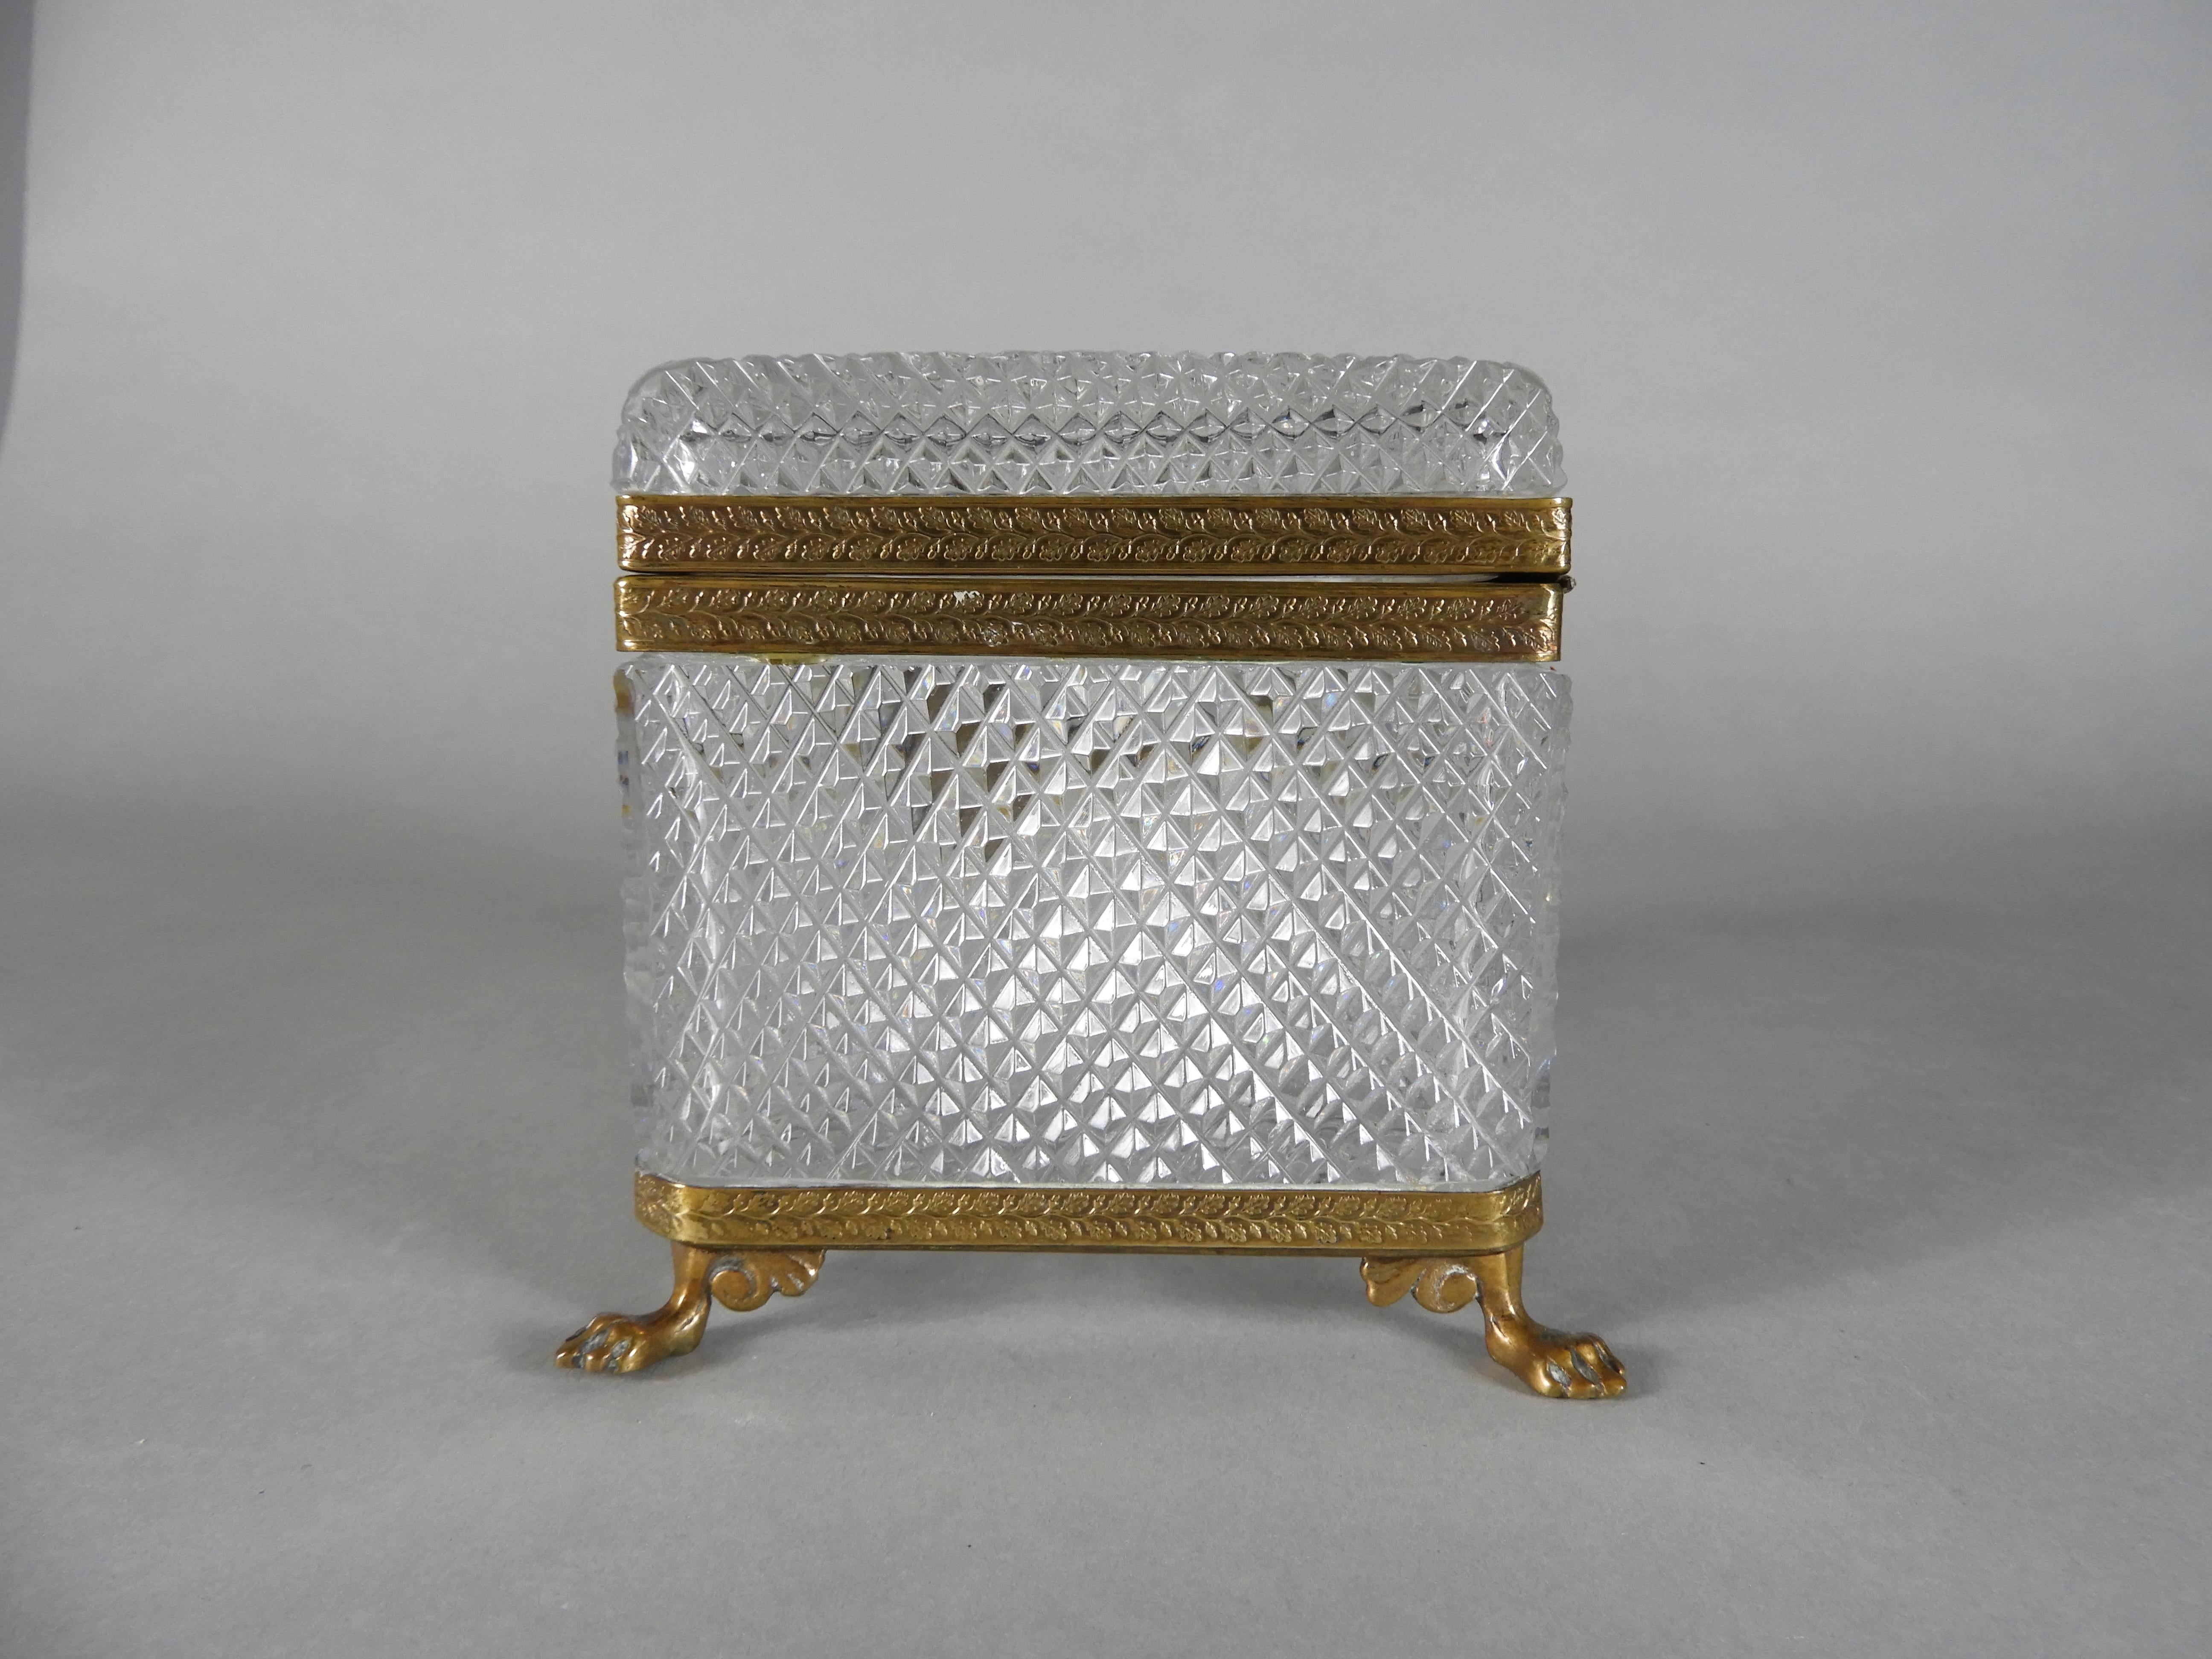 Late 19th Century Antique French Cut Lead Crystal Casket